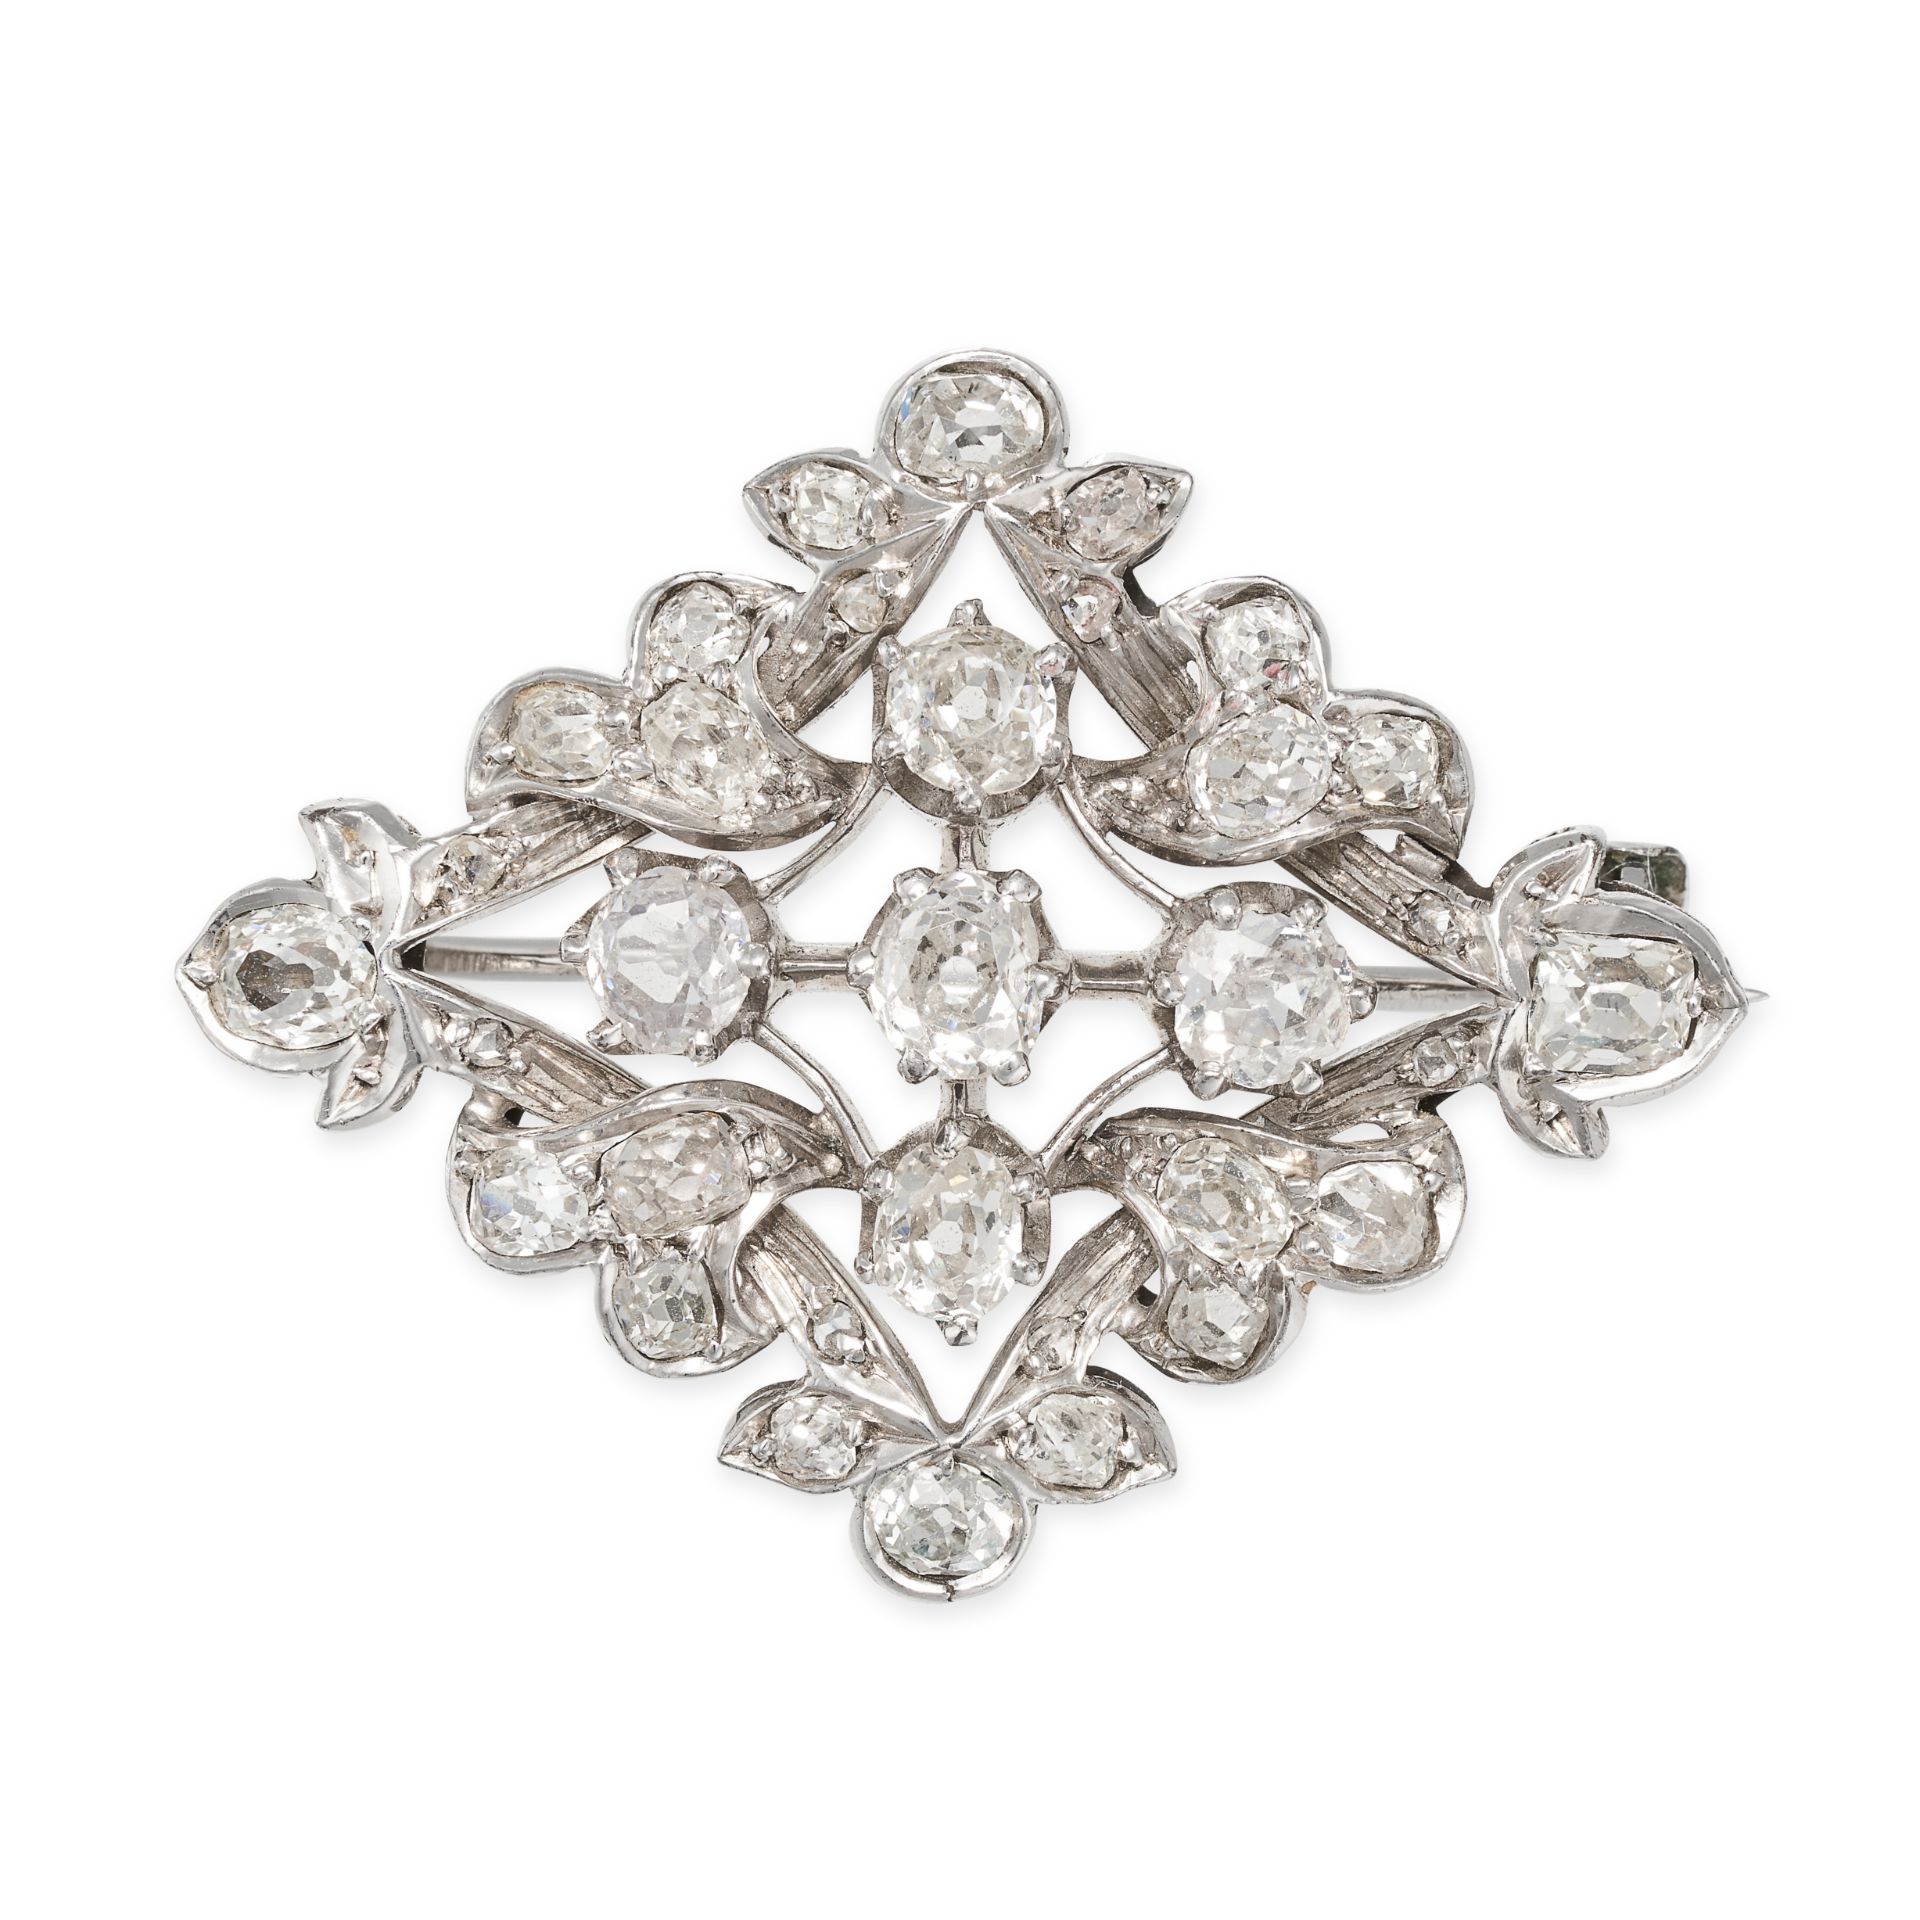 AN ANTIQUE DIAMOND BROOCH in white gold, the openwork lozenge shaped brooch set throughout with o...